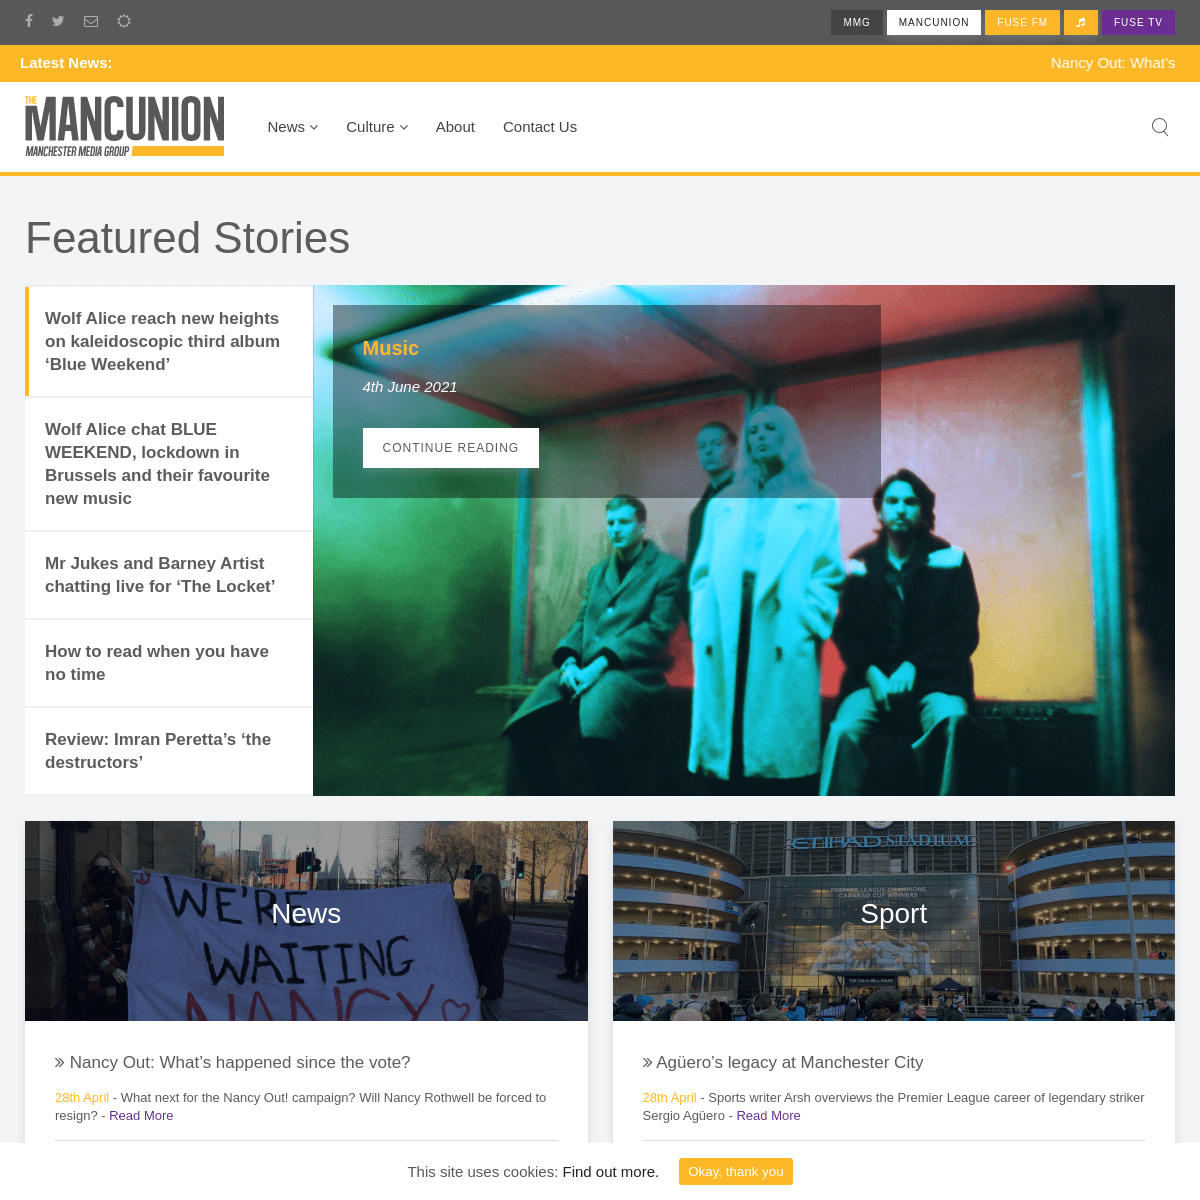 A complete backup of https://mancunion.com